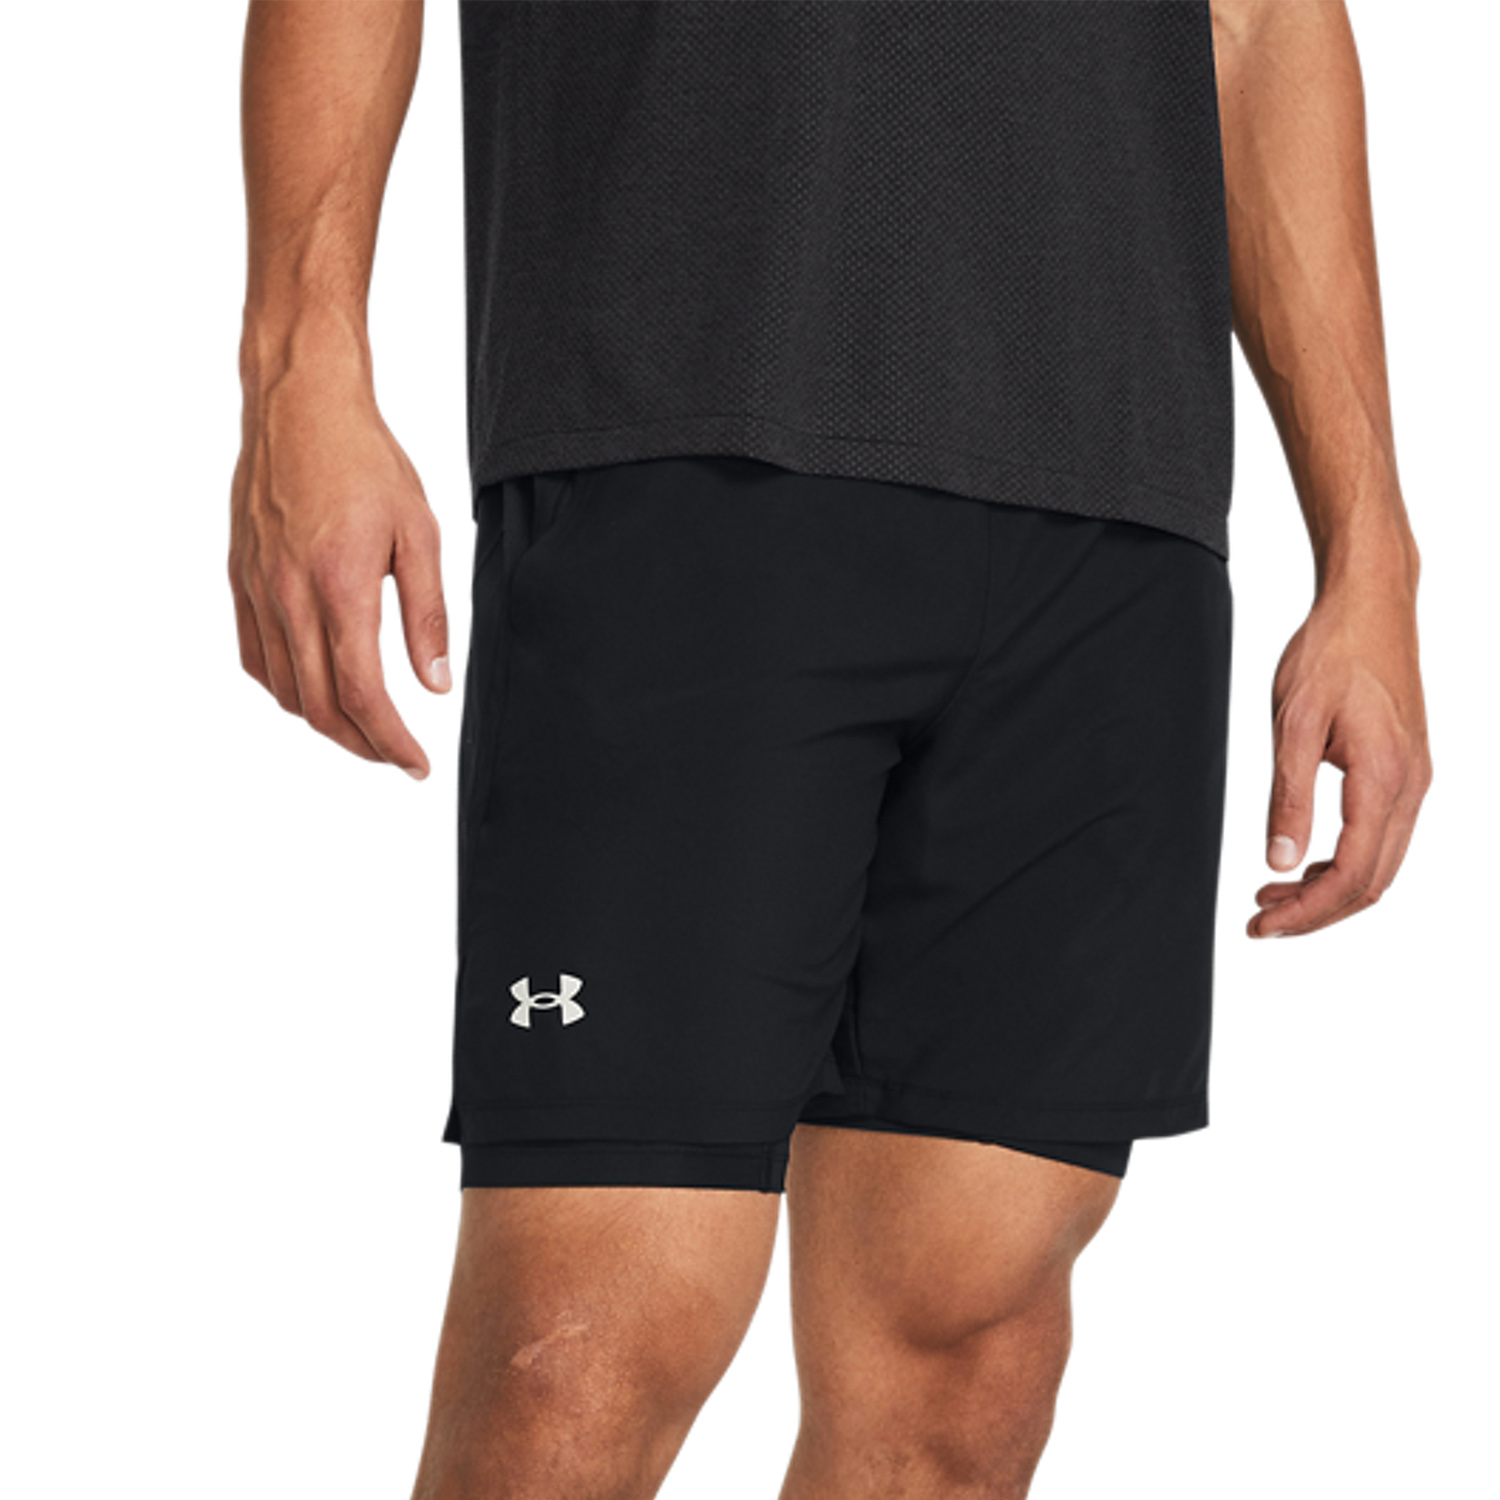 Under Armour Launch 7in 2 in 1 Pantaloncini - Black/Reflective